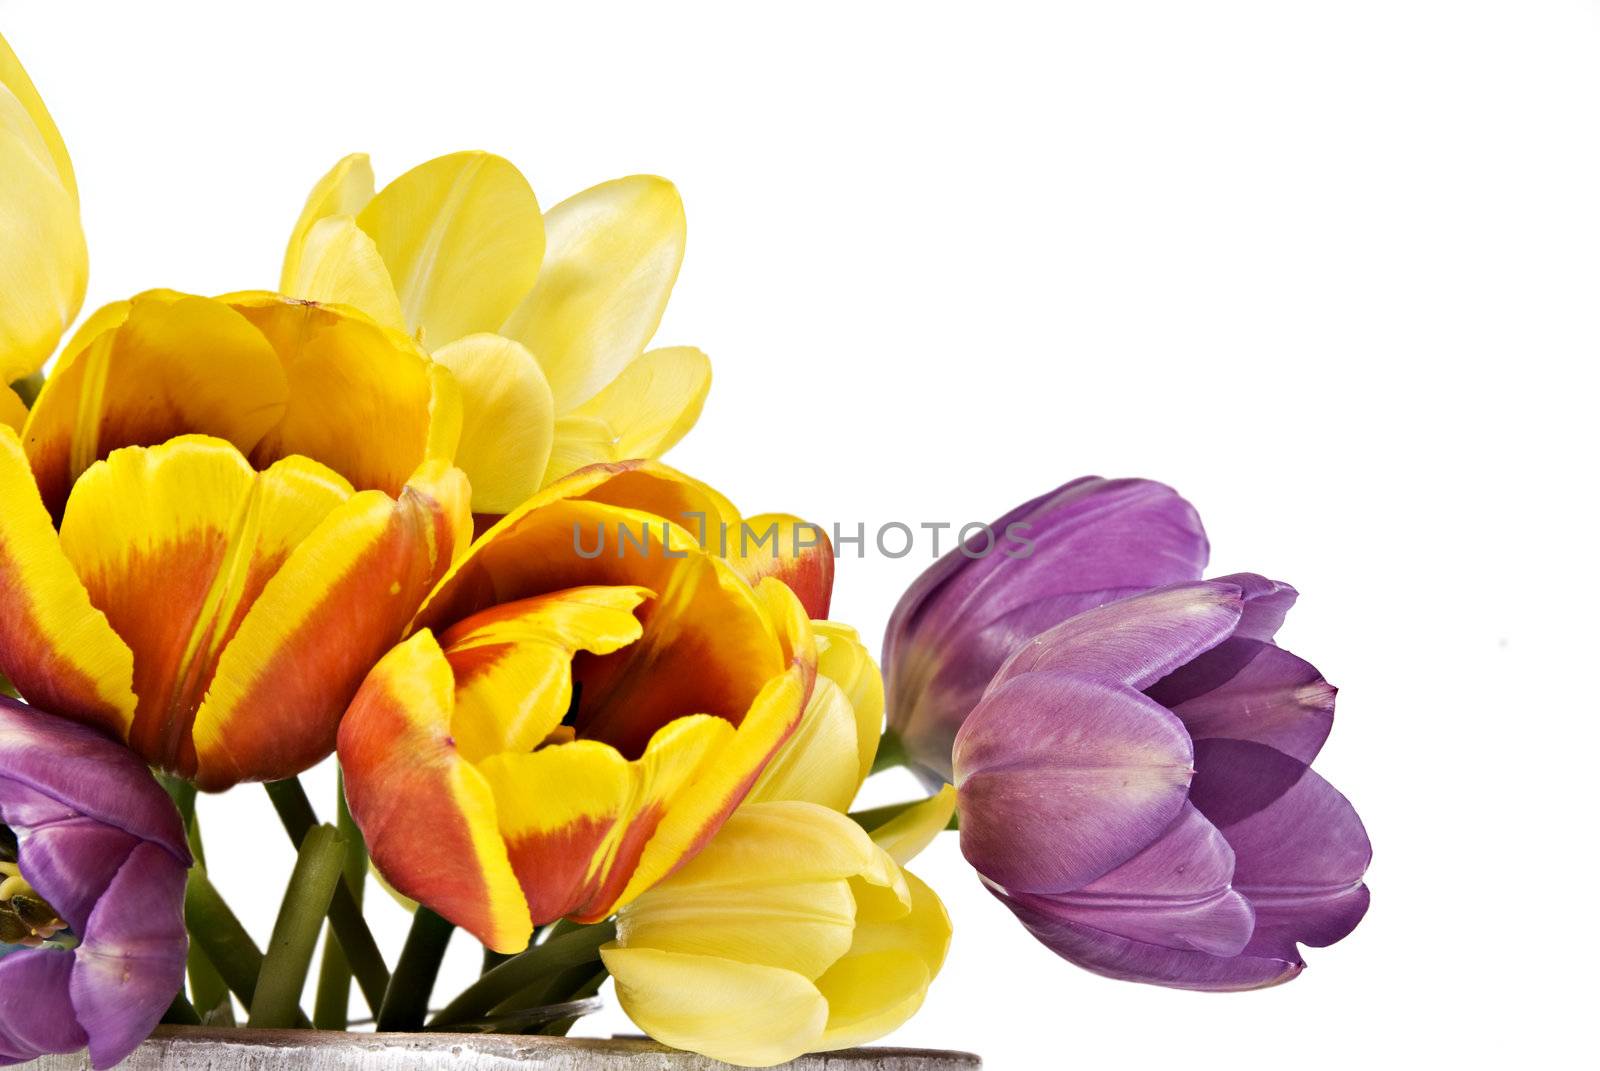 Tulips in various colors by tish1